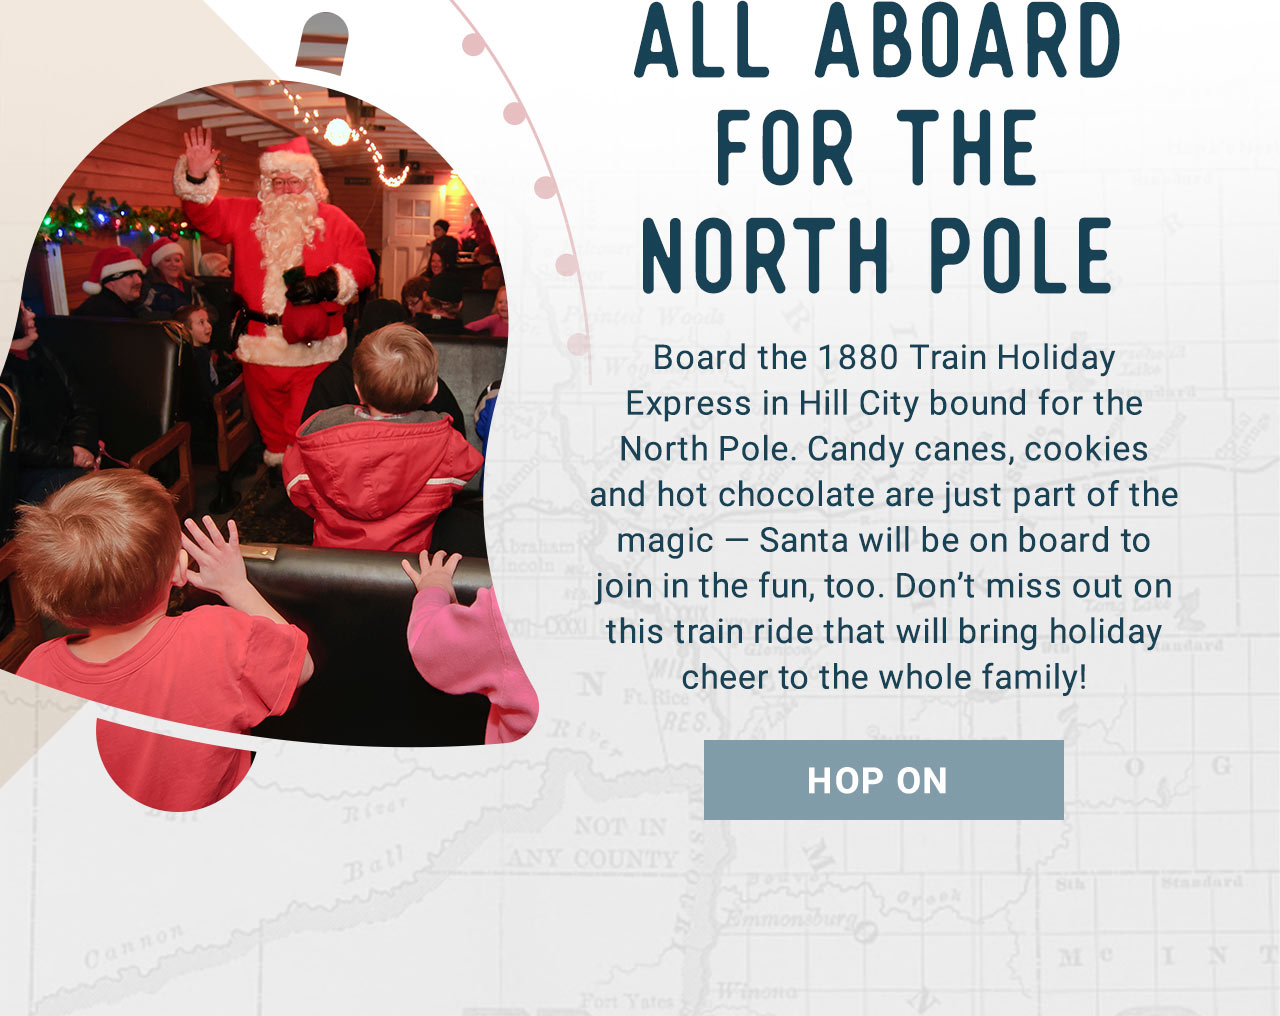 All Aboard for the North Pole - Hop On